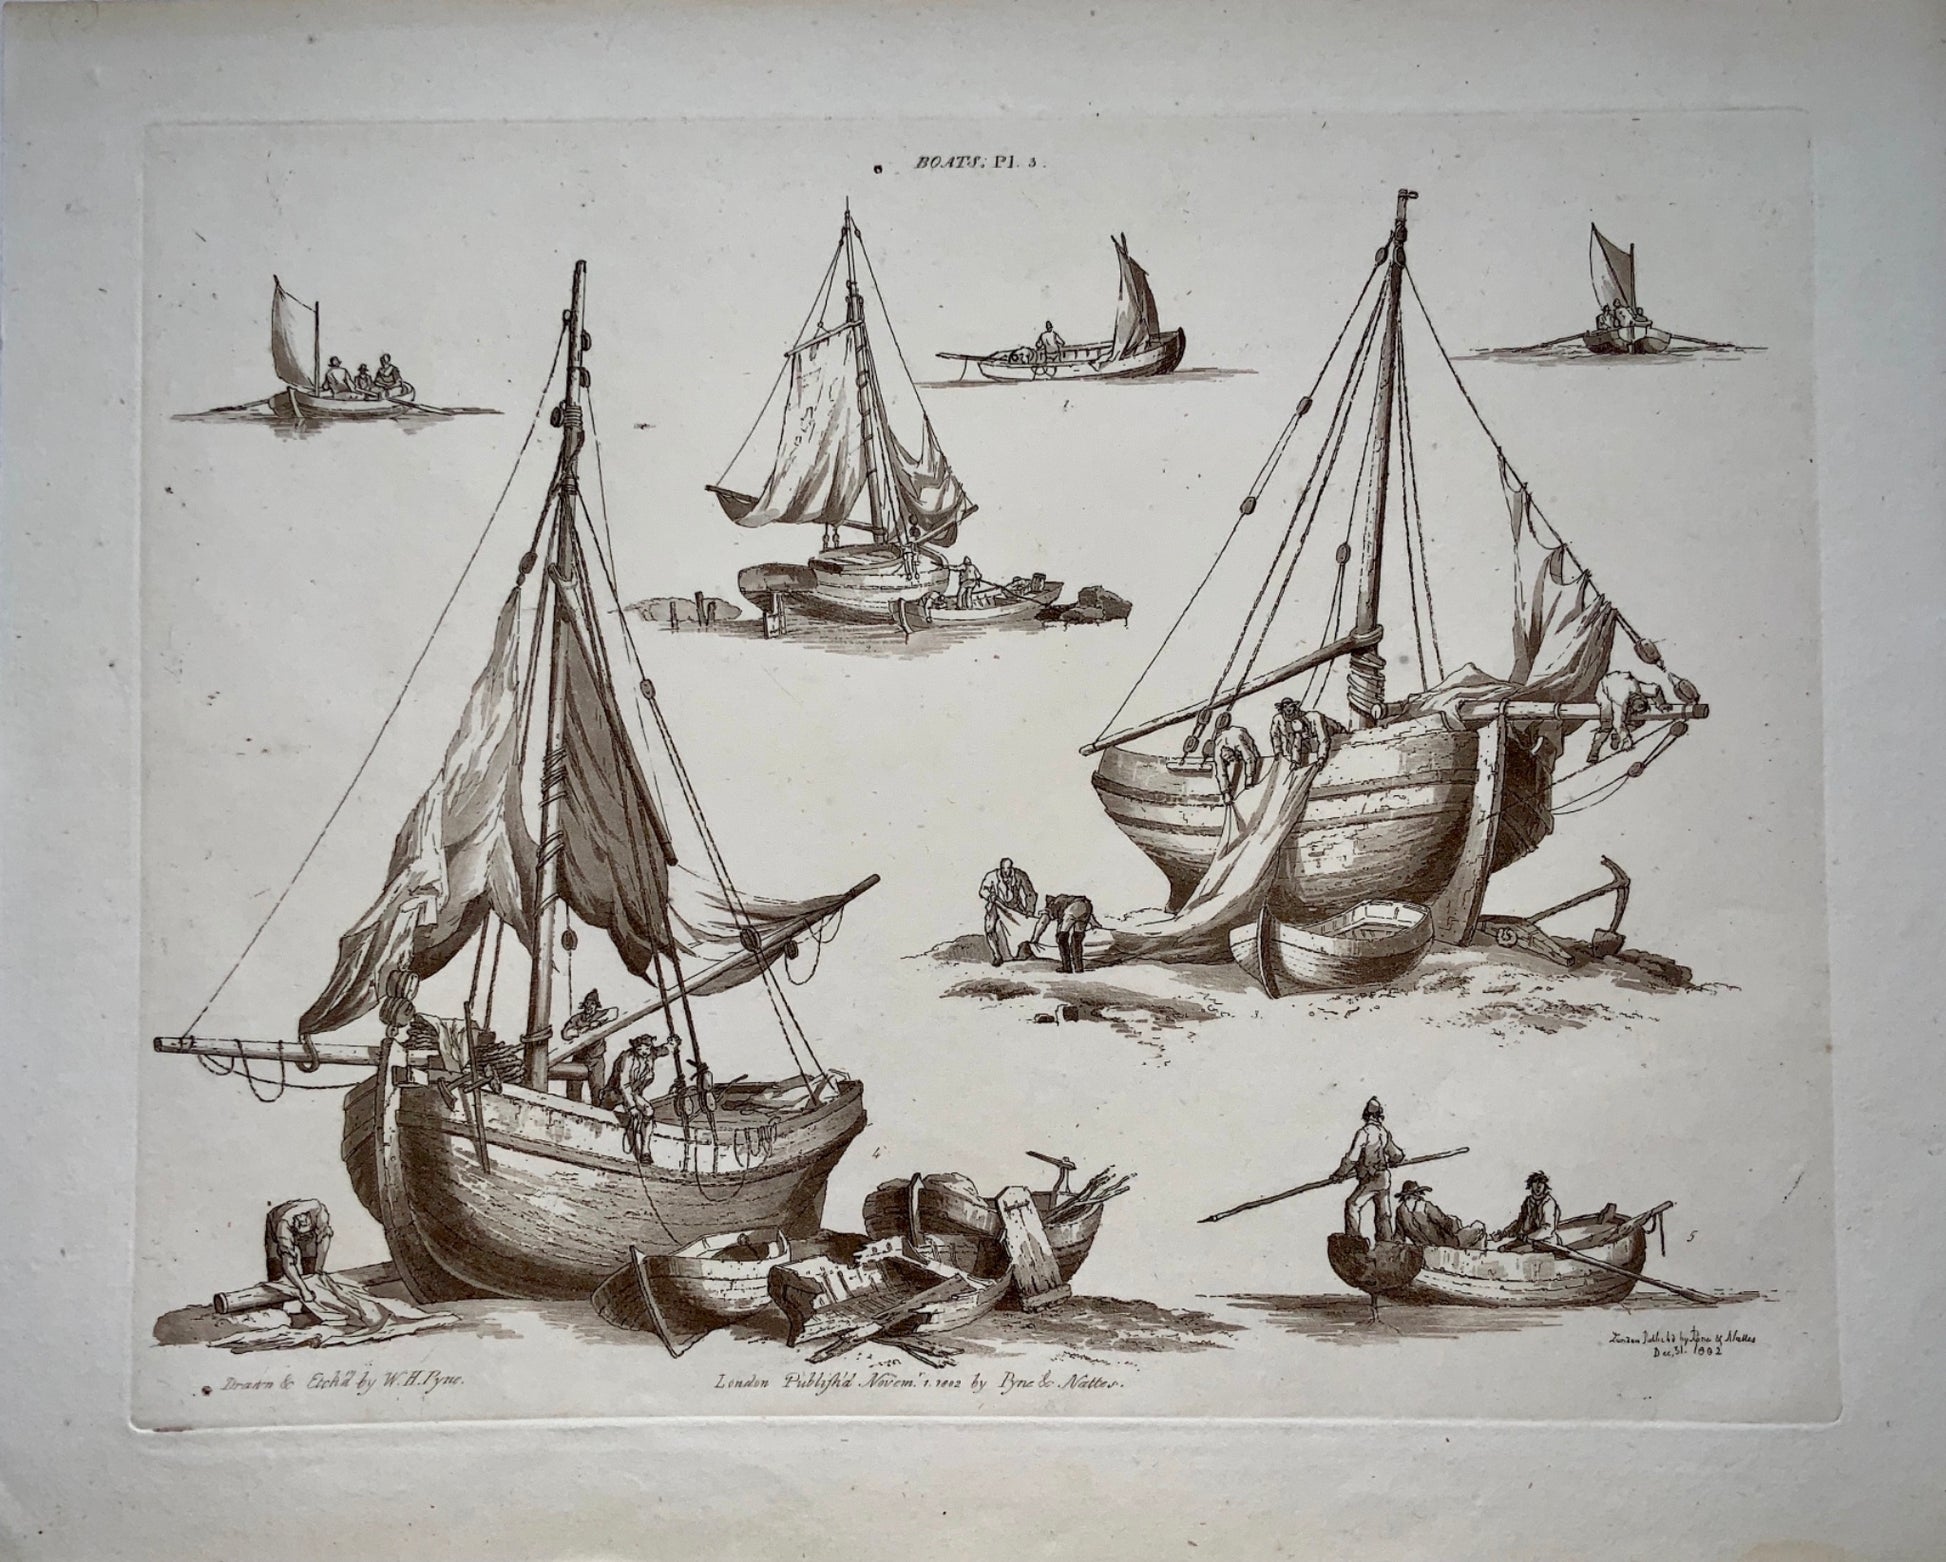 Sea Fishing - Aquatint by William Henry Pyne published in 1802